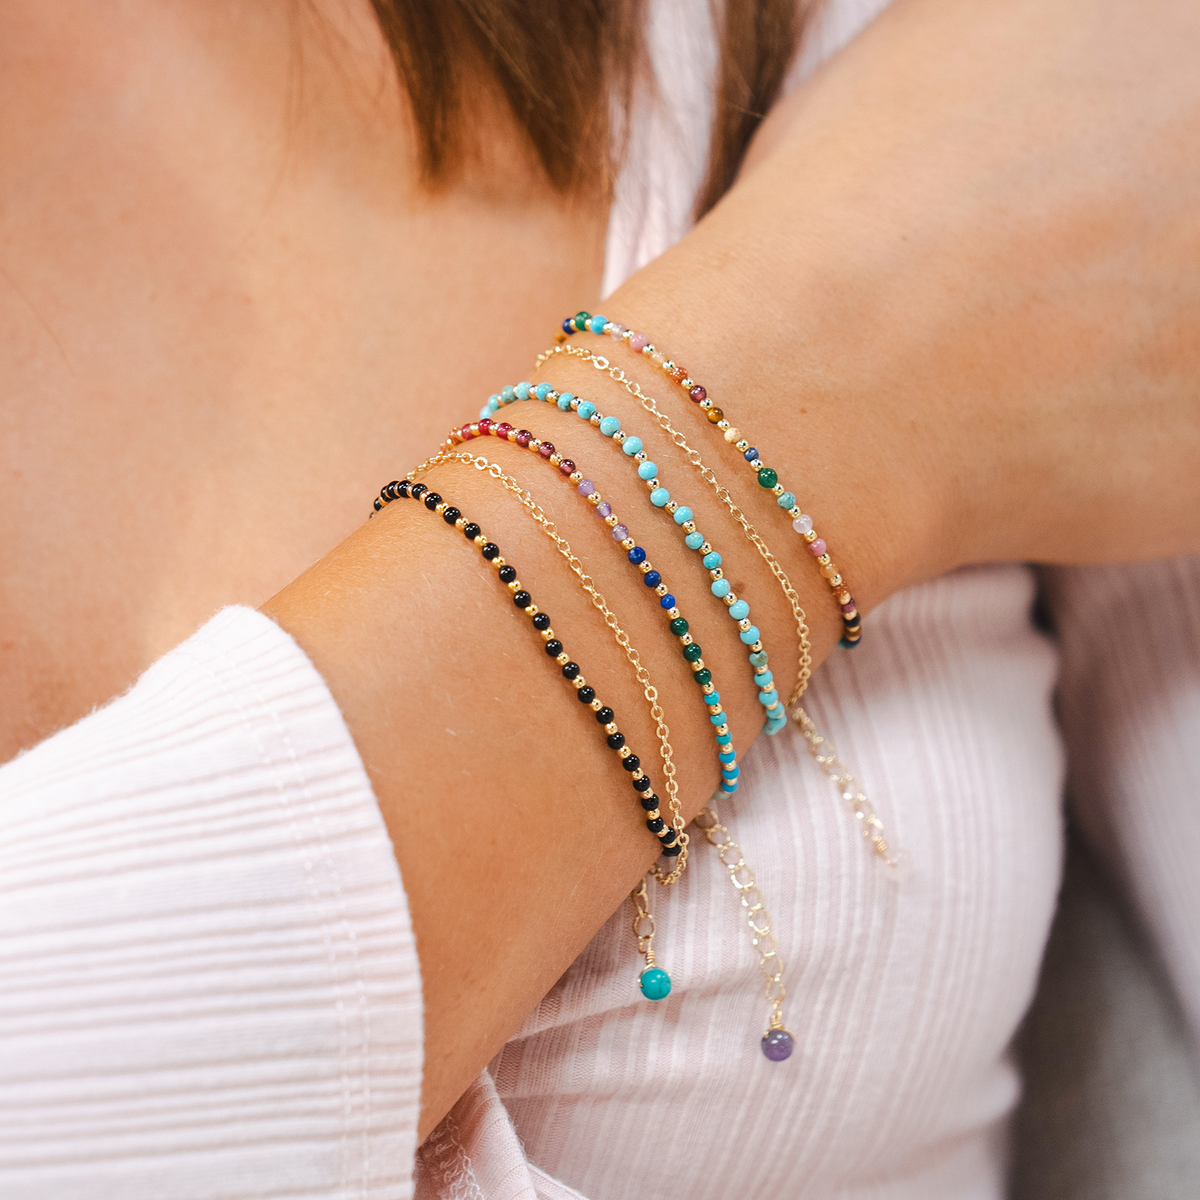 Model wearing a stack of four healing bracelets. The bracelets include a 2mm onyx stone healing bracelet, a 2mm multicolor stone and gold bead healing bracelet, a 2mm turquoise stone and gold bead healing bracelet, and a 2mm multicolor stone and gold bead healing bracelet 